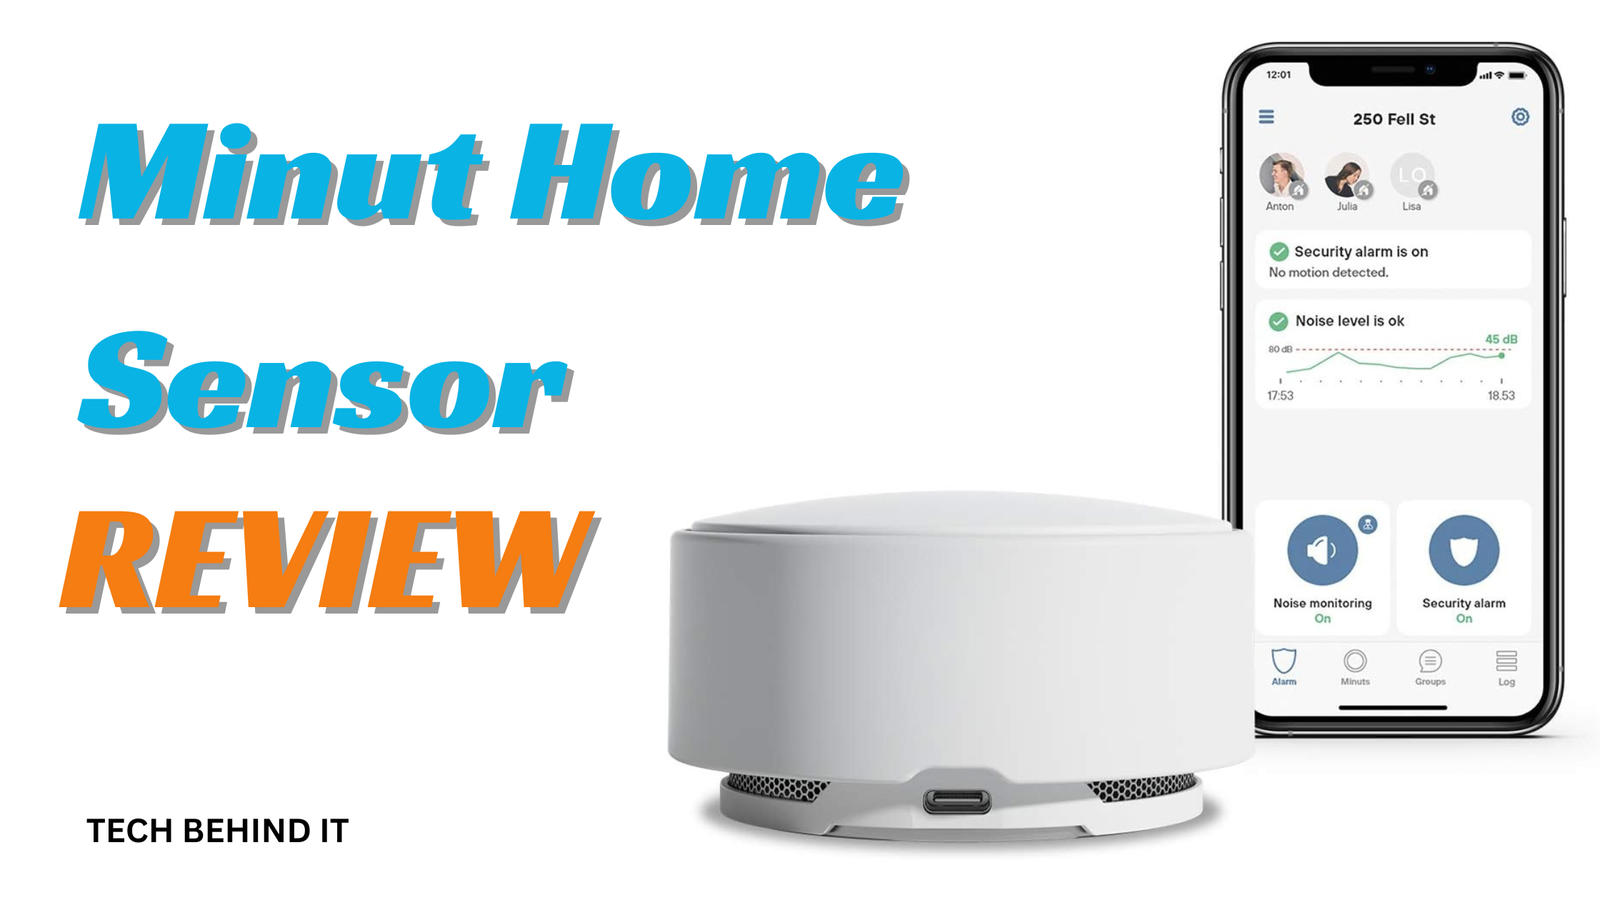 The Future of Home Security: Insights from the Minut Home Sensor